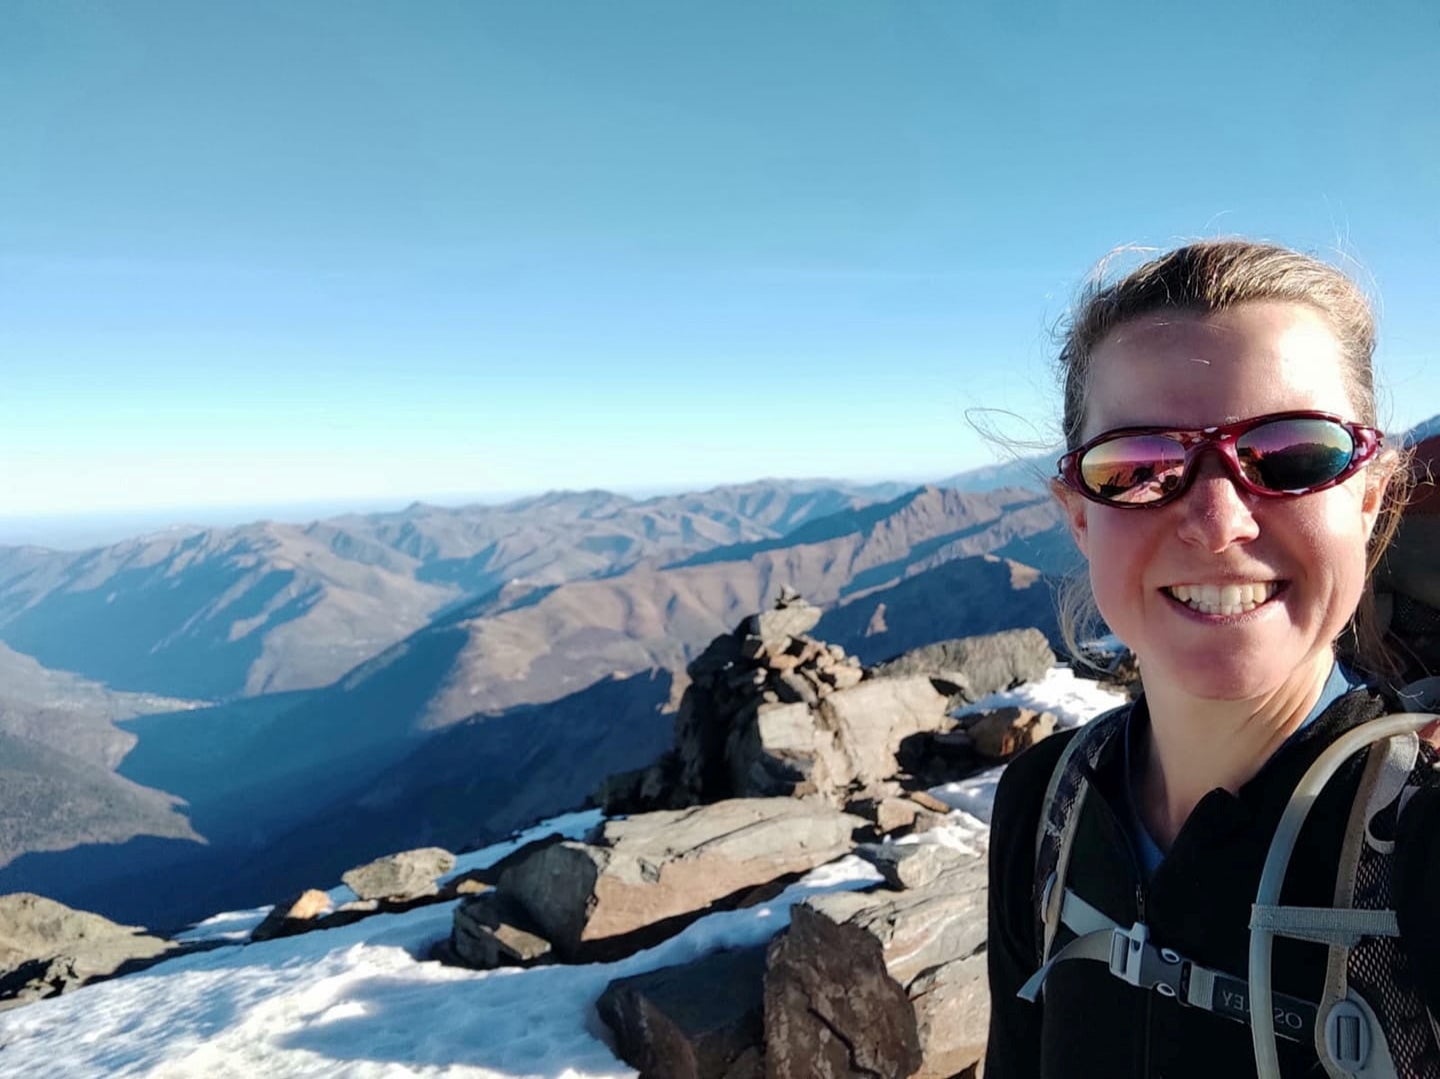 The body and belongings of British hiker Esther Dingley have been found after she went missing in the Pyrenees in November 2020